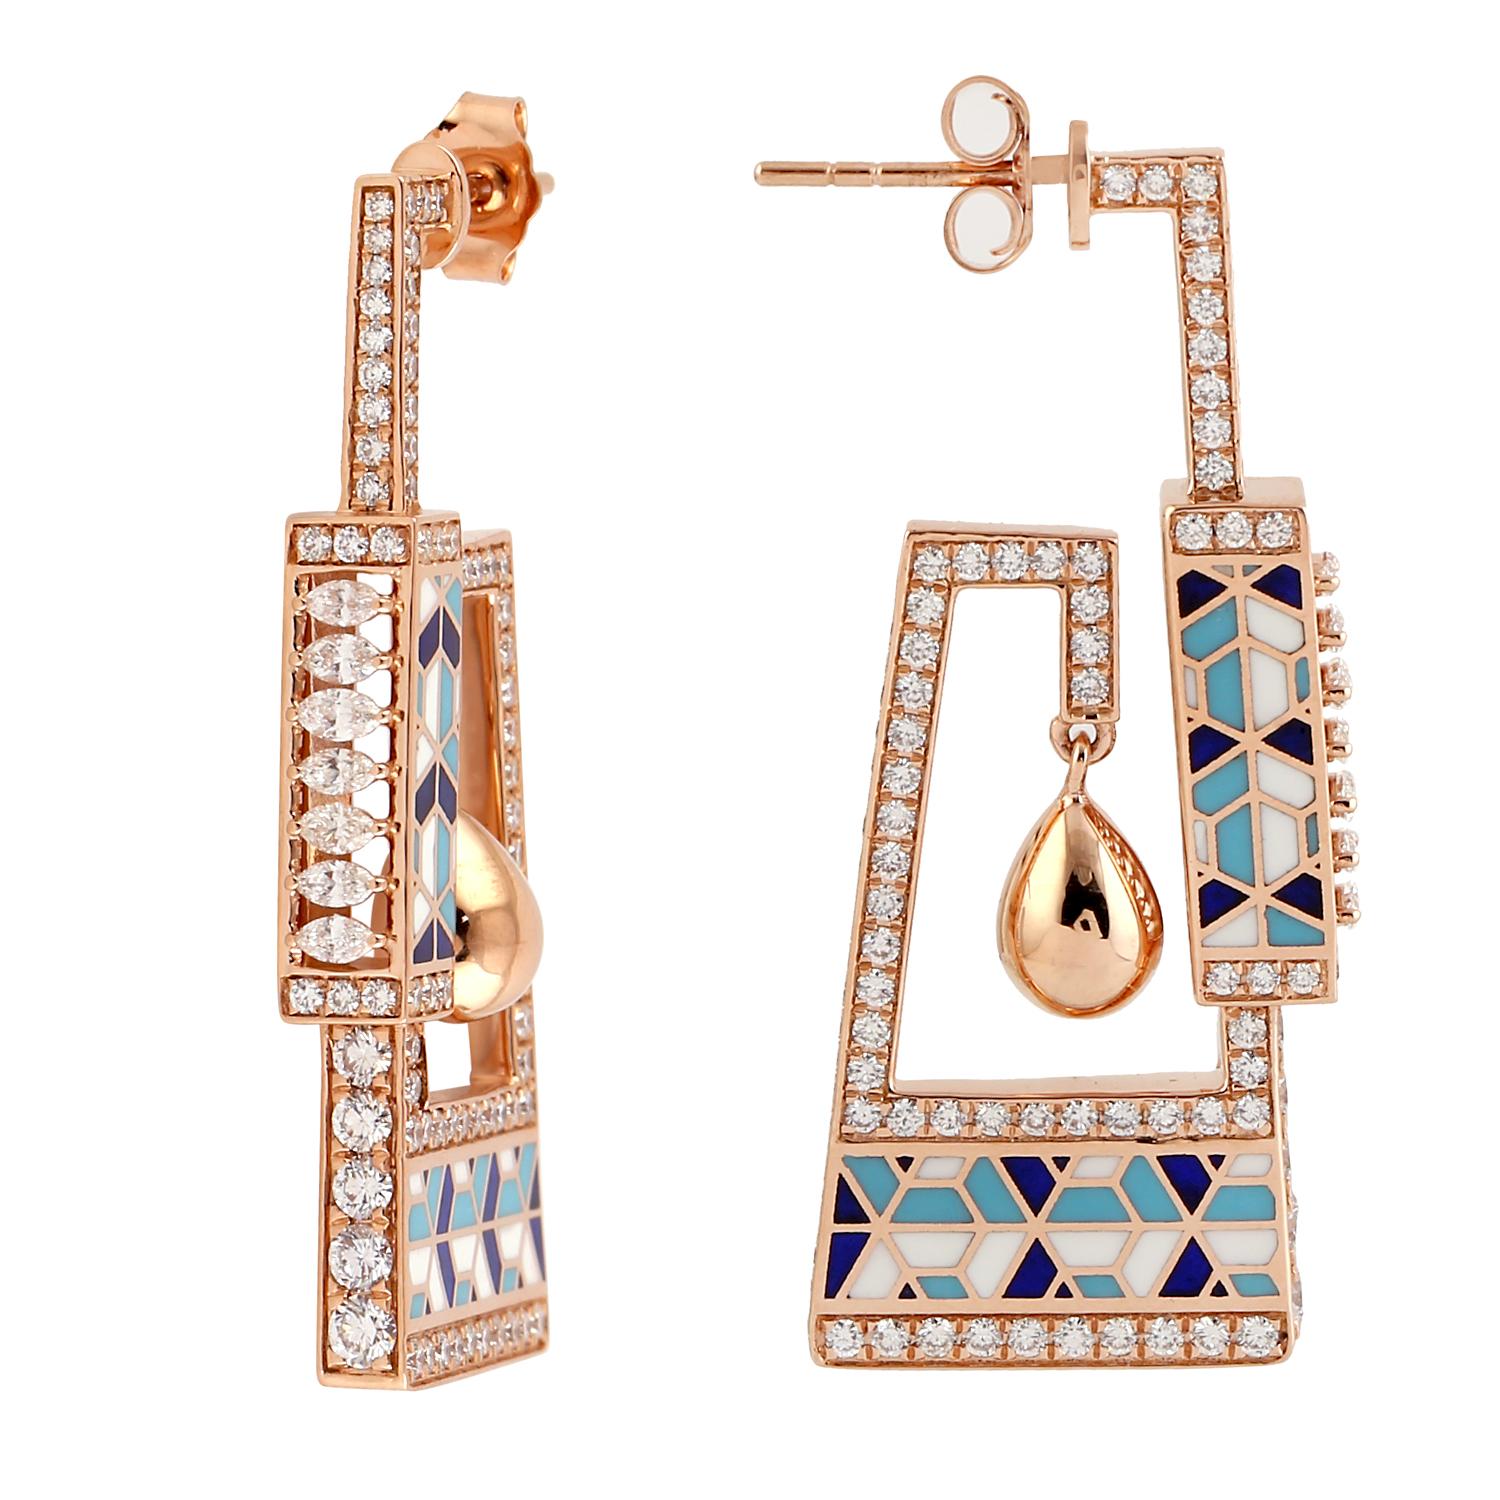 Art Deco Moroccan Style Ceramic Tile Inlay Work on Unique Architectural Design Earrings For Sale